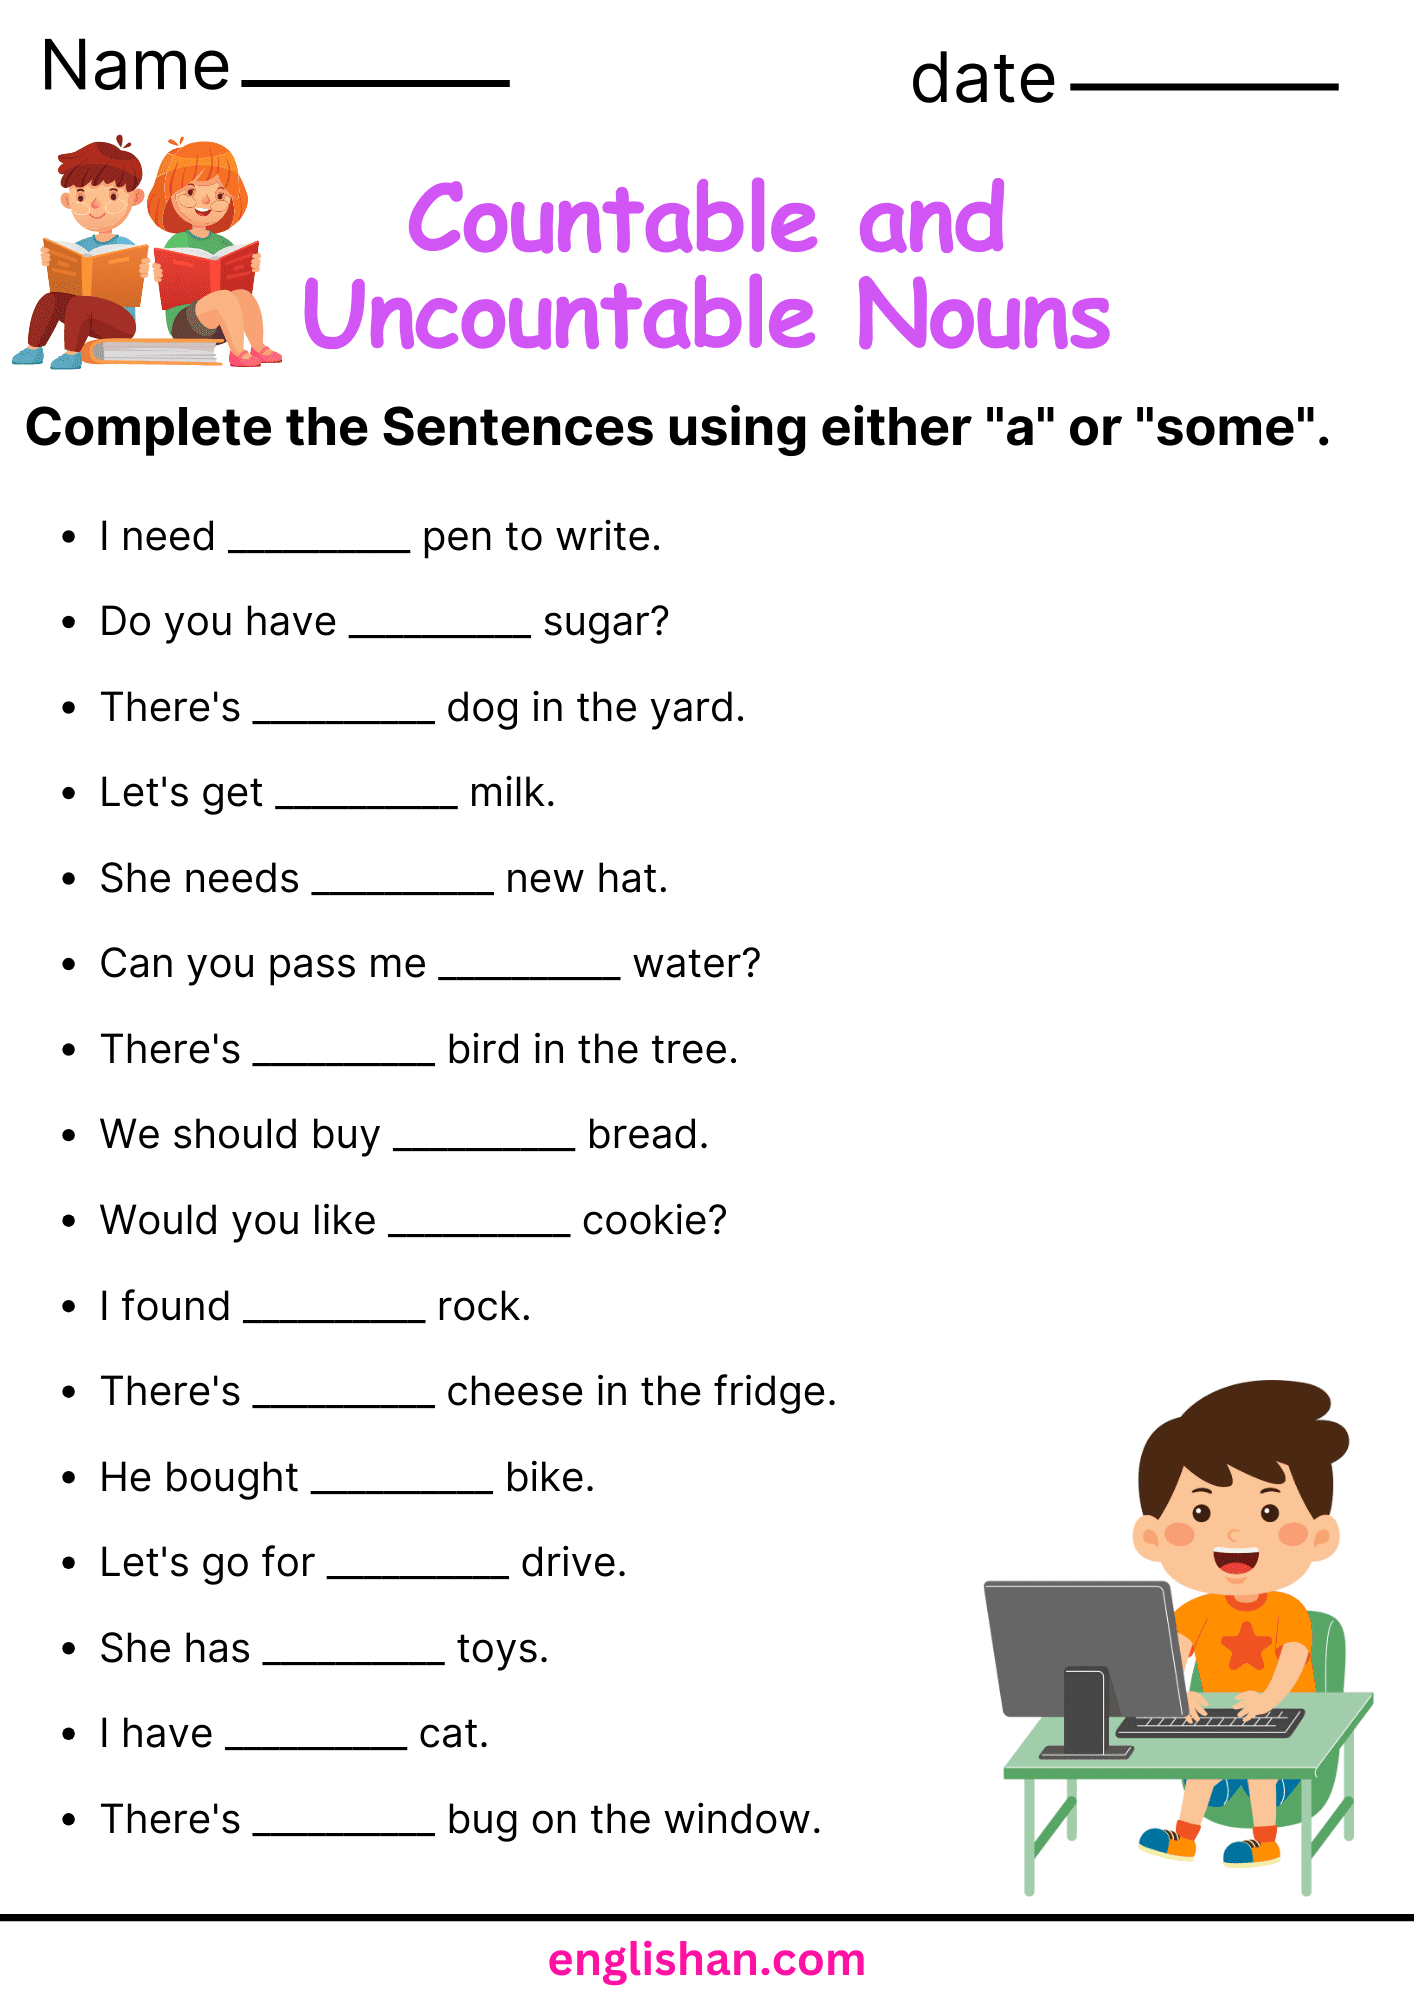 Countable and Uncountable Nouns Worksheets and Exercises. Complete the Sentences using a or some.